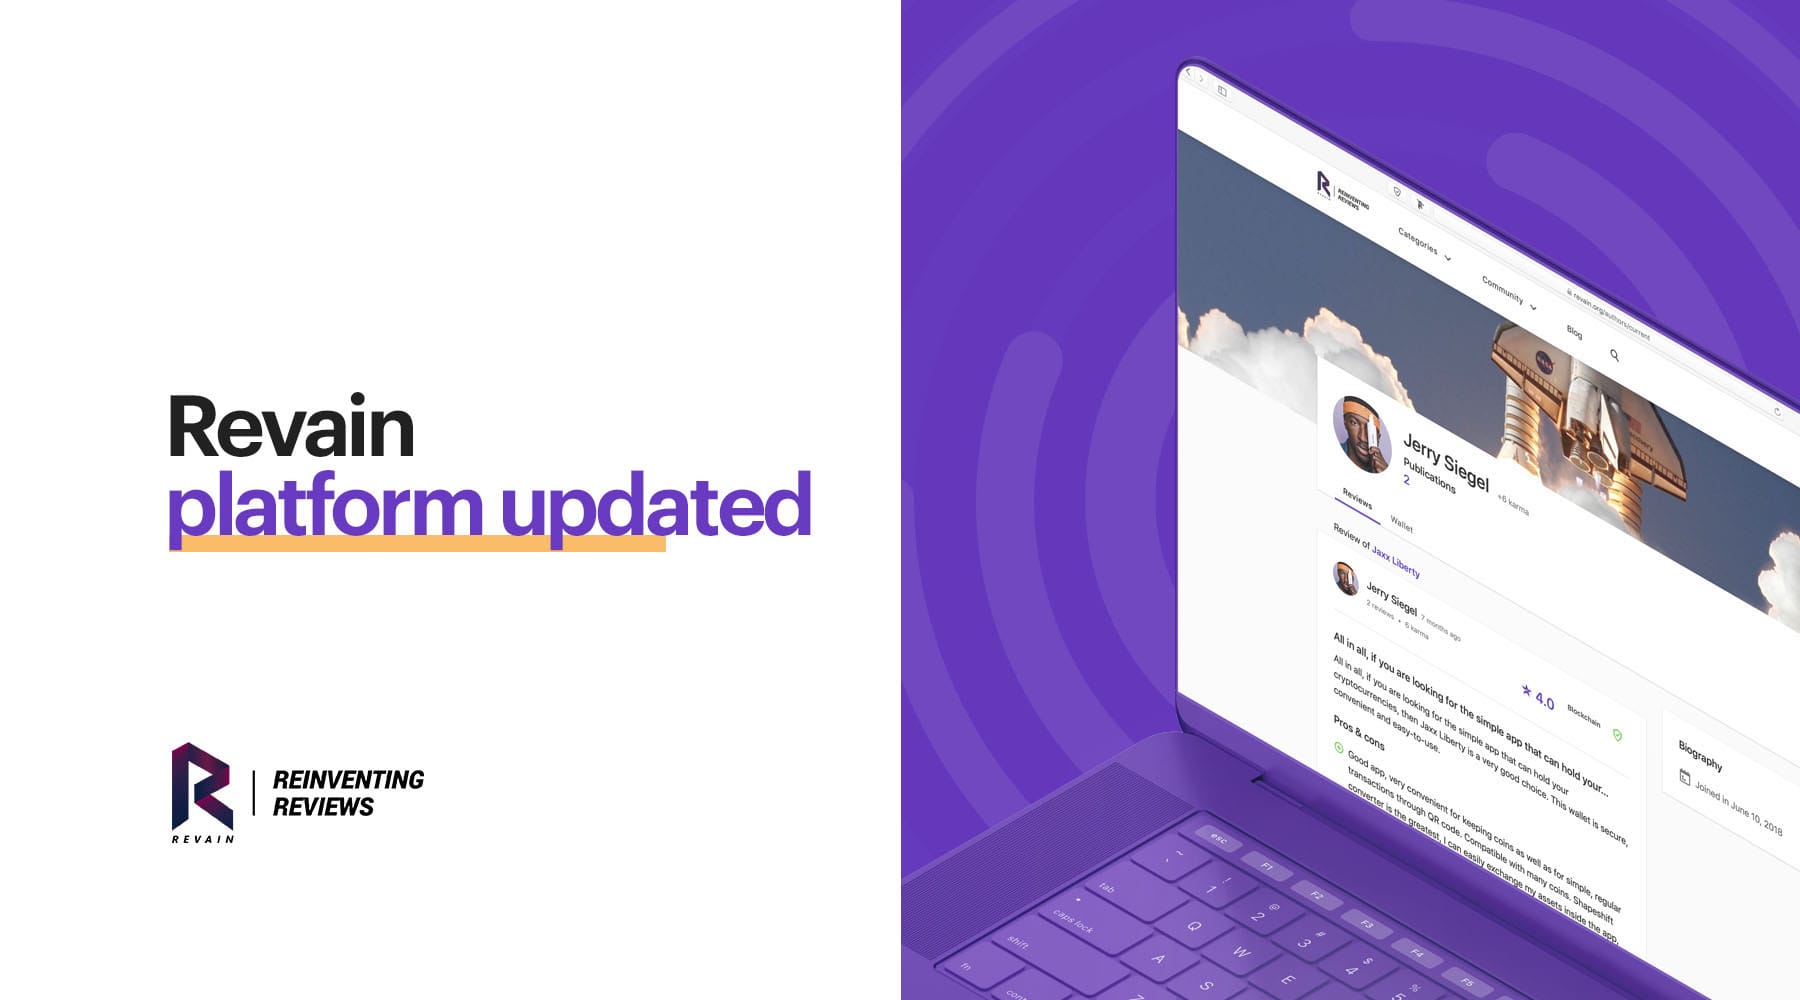 Article Revain platform update: Experts page, Latest reviews and more